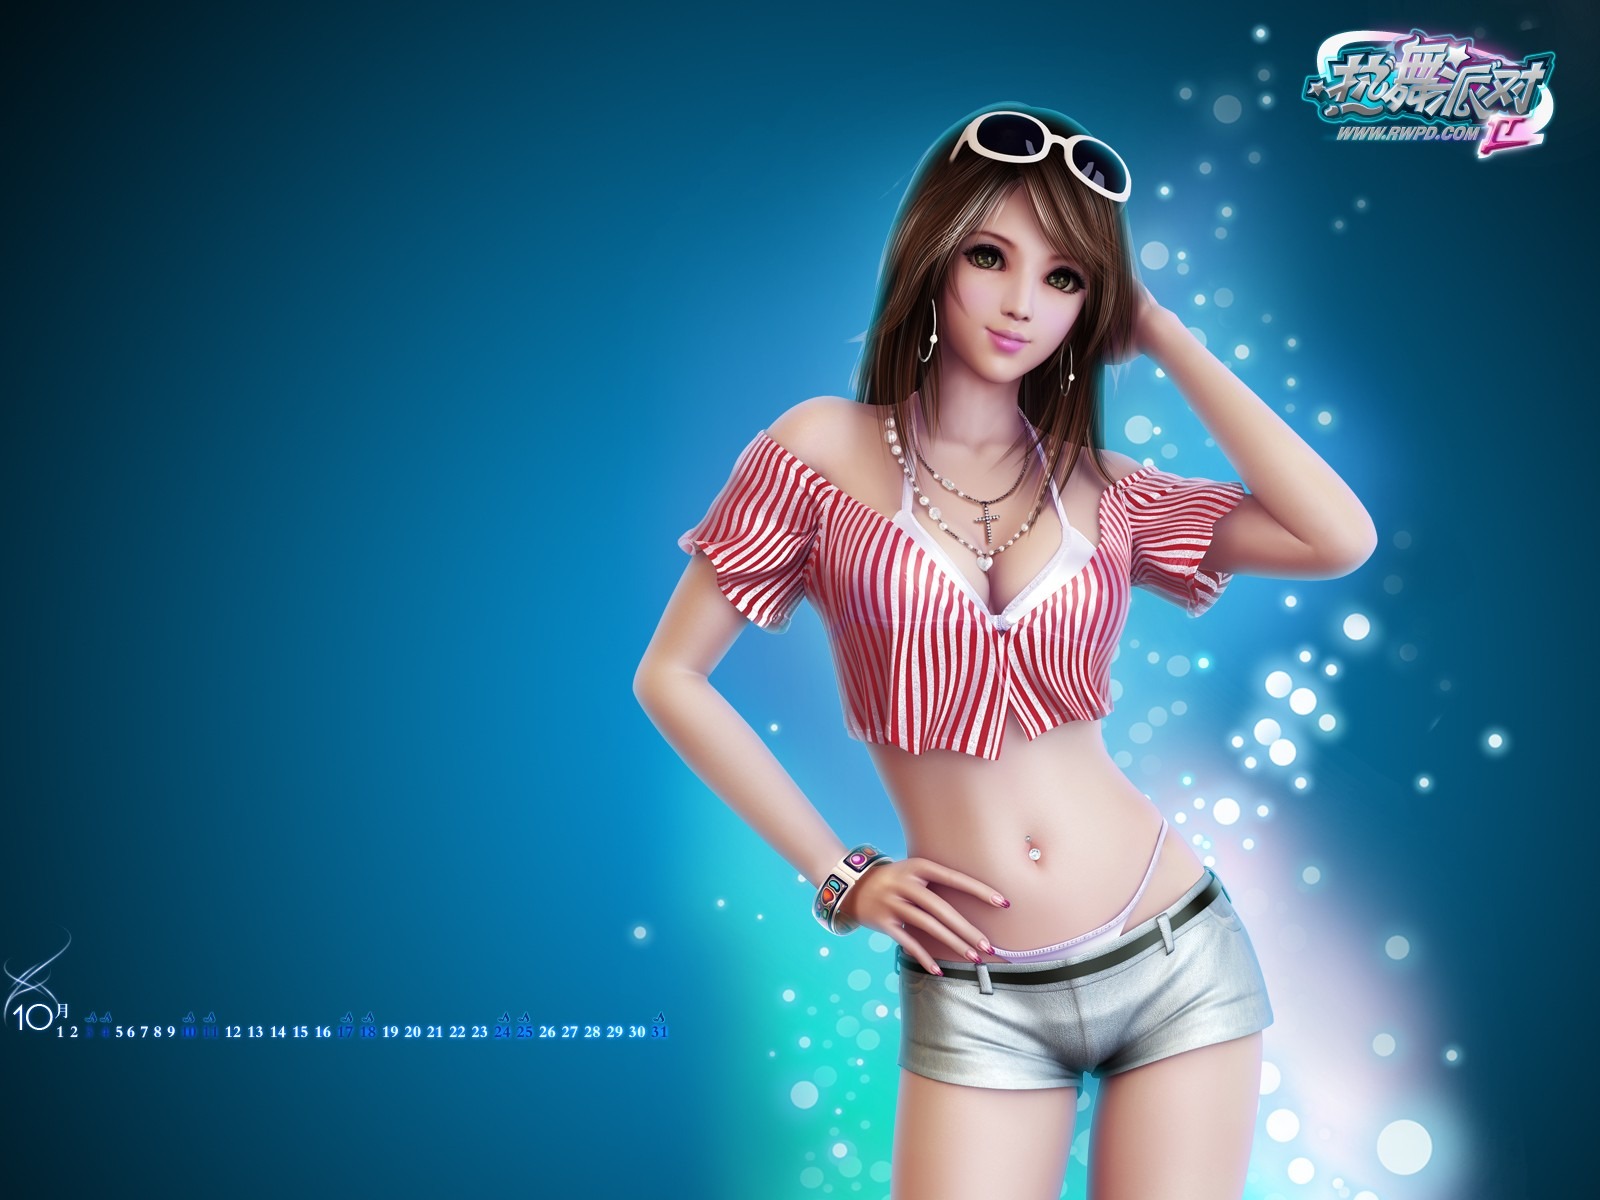 Online game Hot Dance Party II official wallpapers #4 - 1600x1200